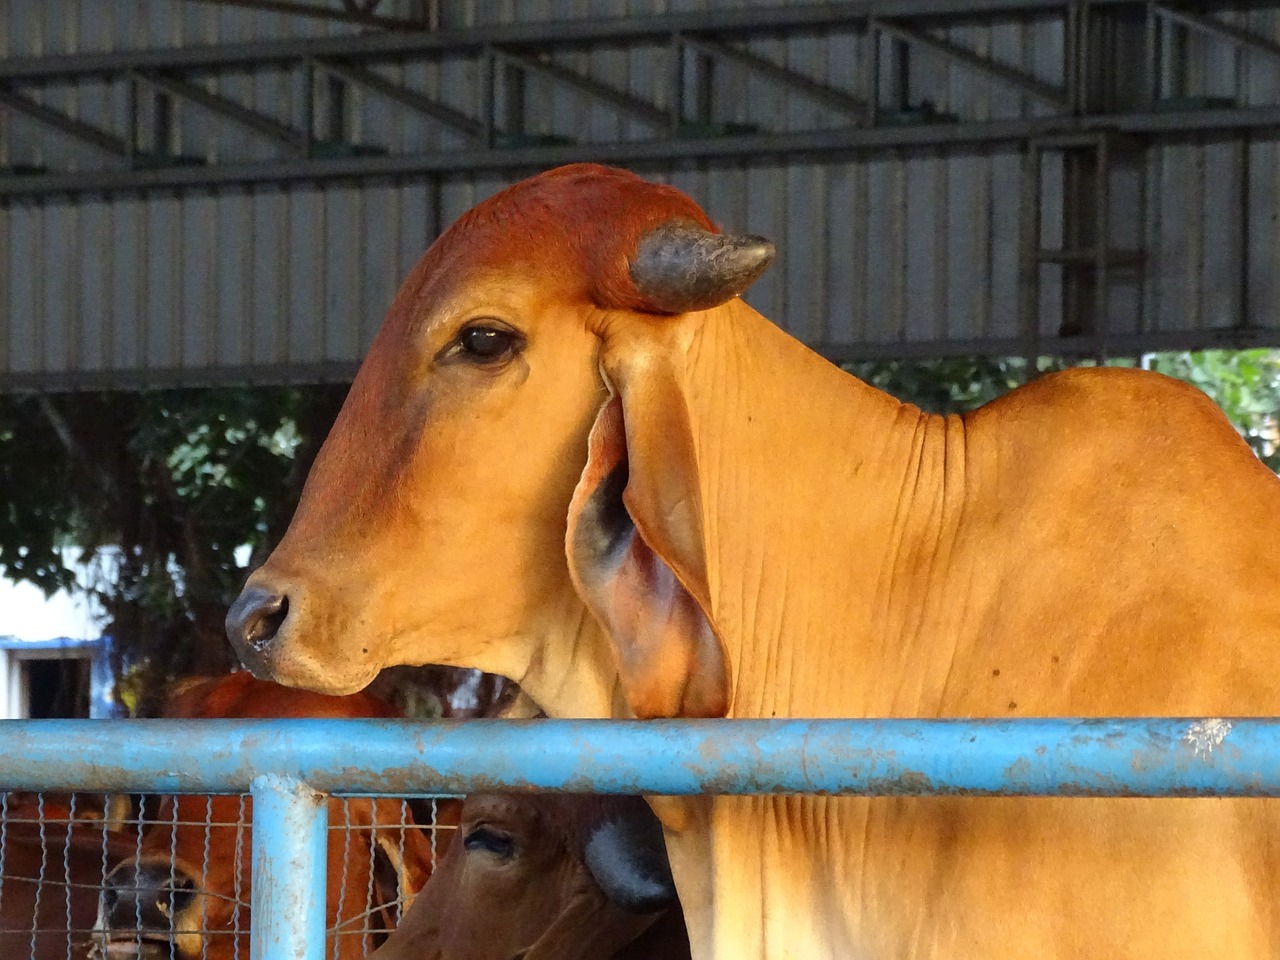 This Cows Breed Produces 10 to 20 Times More Milk Than Regular Cows: Report